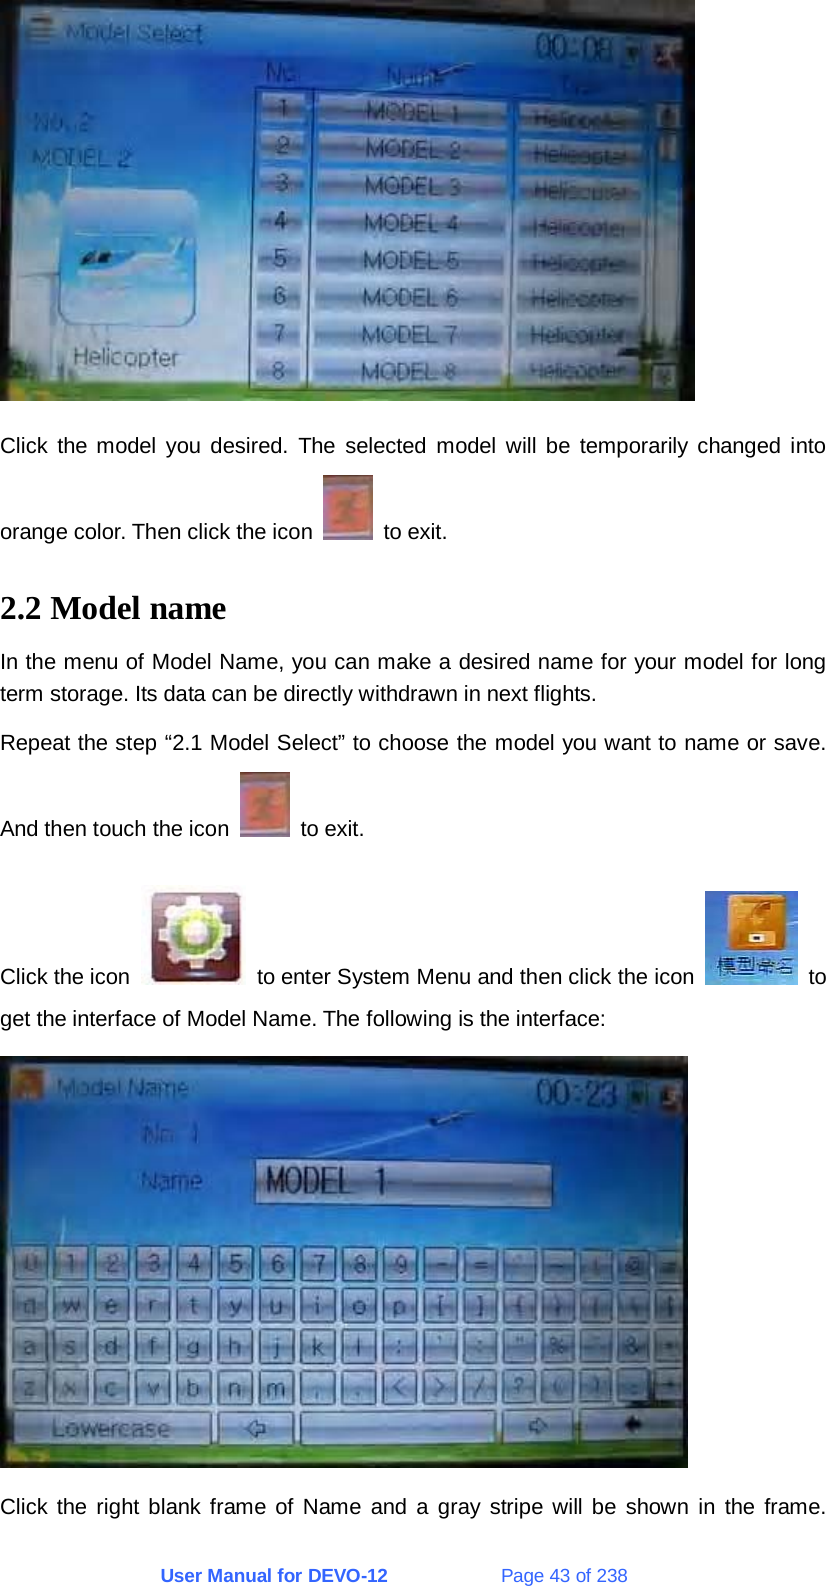 User Manual for DEVO-12             Page 43 of 238  Click the model you desired. The selected model will be temporarily changed into orange color. Then click the icon   to exit. 2.2 Model name In the menu of Model Name, you can make a desired name for your model for long term storage. Its data can be directly withdrawn in next flights. Repeat the step “2.1 Model Select” to choose the model you want to name or save. And then touch the icon   to exit. Click the icon    to enter System Menu and then click the icon   to get the interface of Model Name. The following is the interface:  Click the right blank frame of Name and a gray stripe will be shown in the frame.  